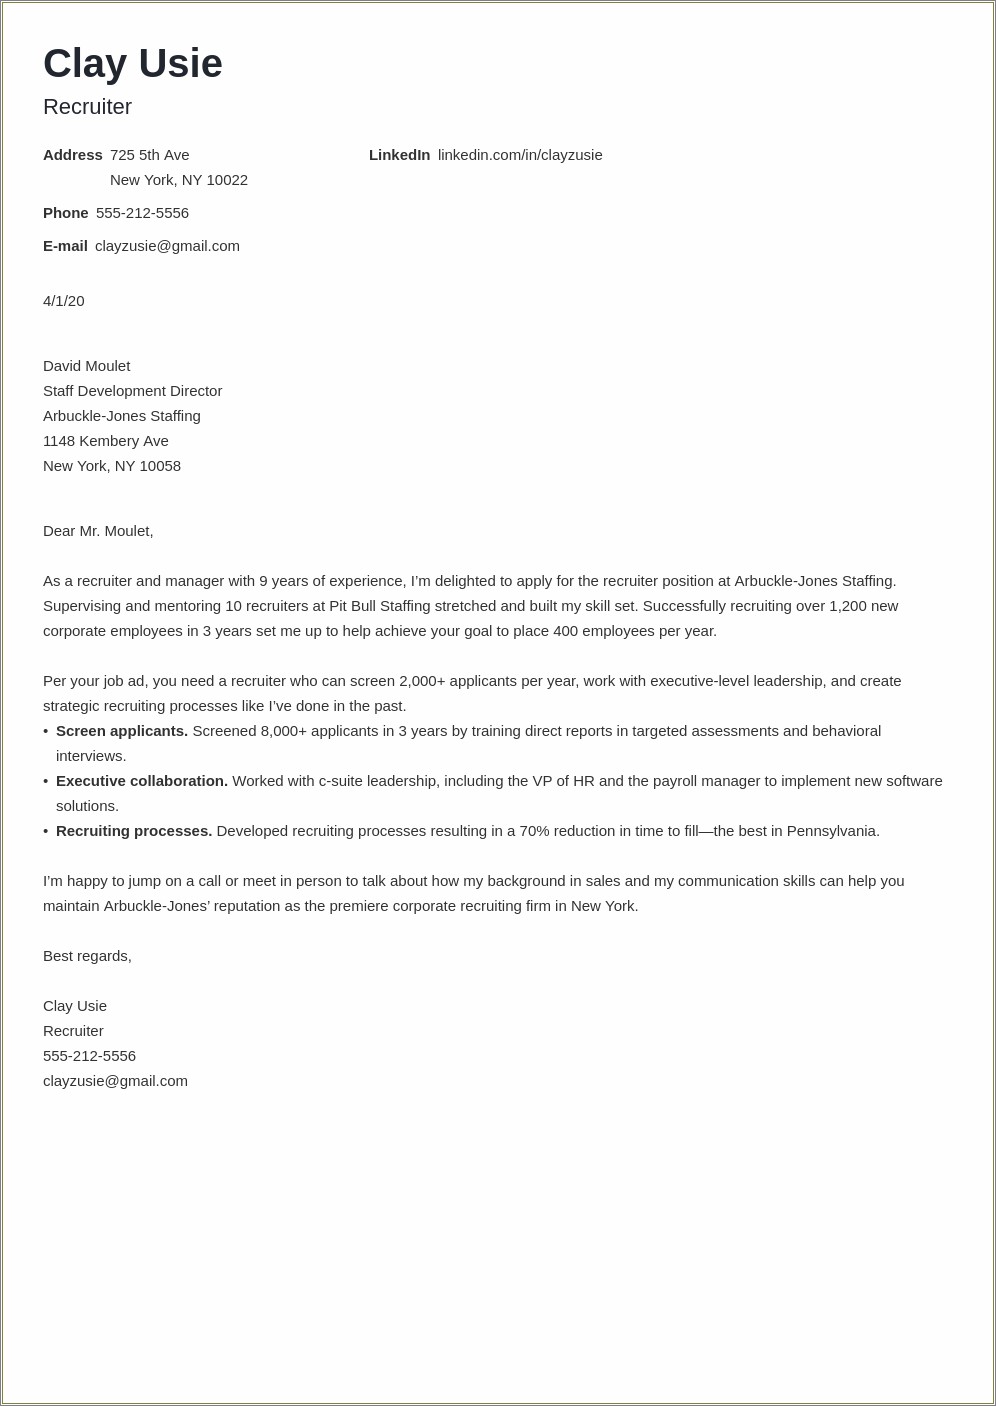 Email Cover Letter And Resume Sample To Recruiter